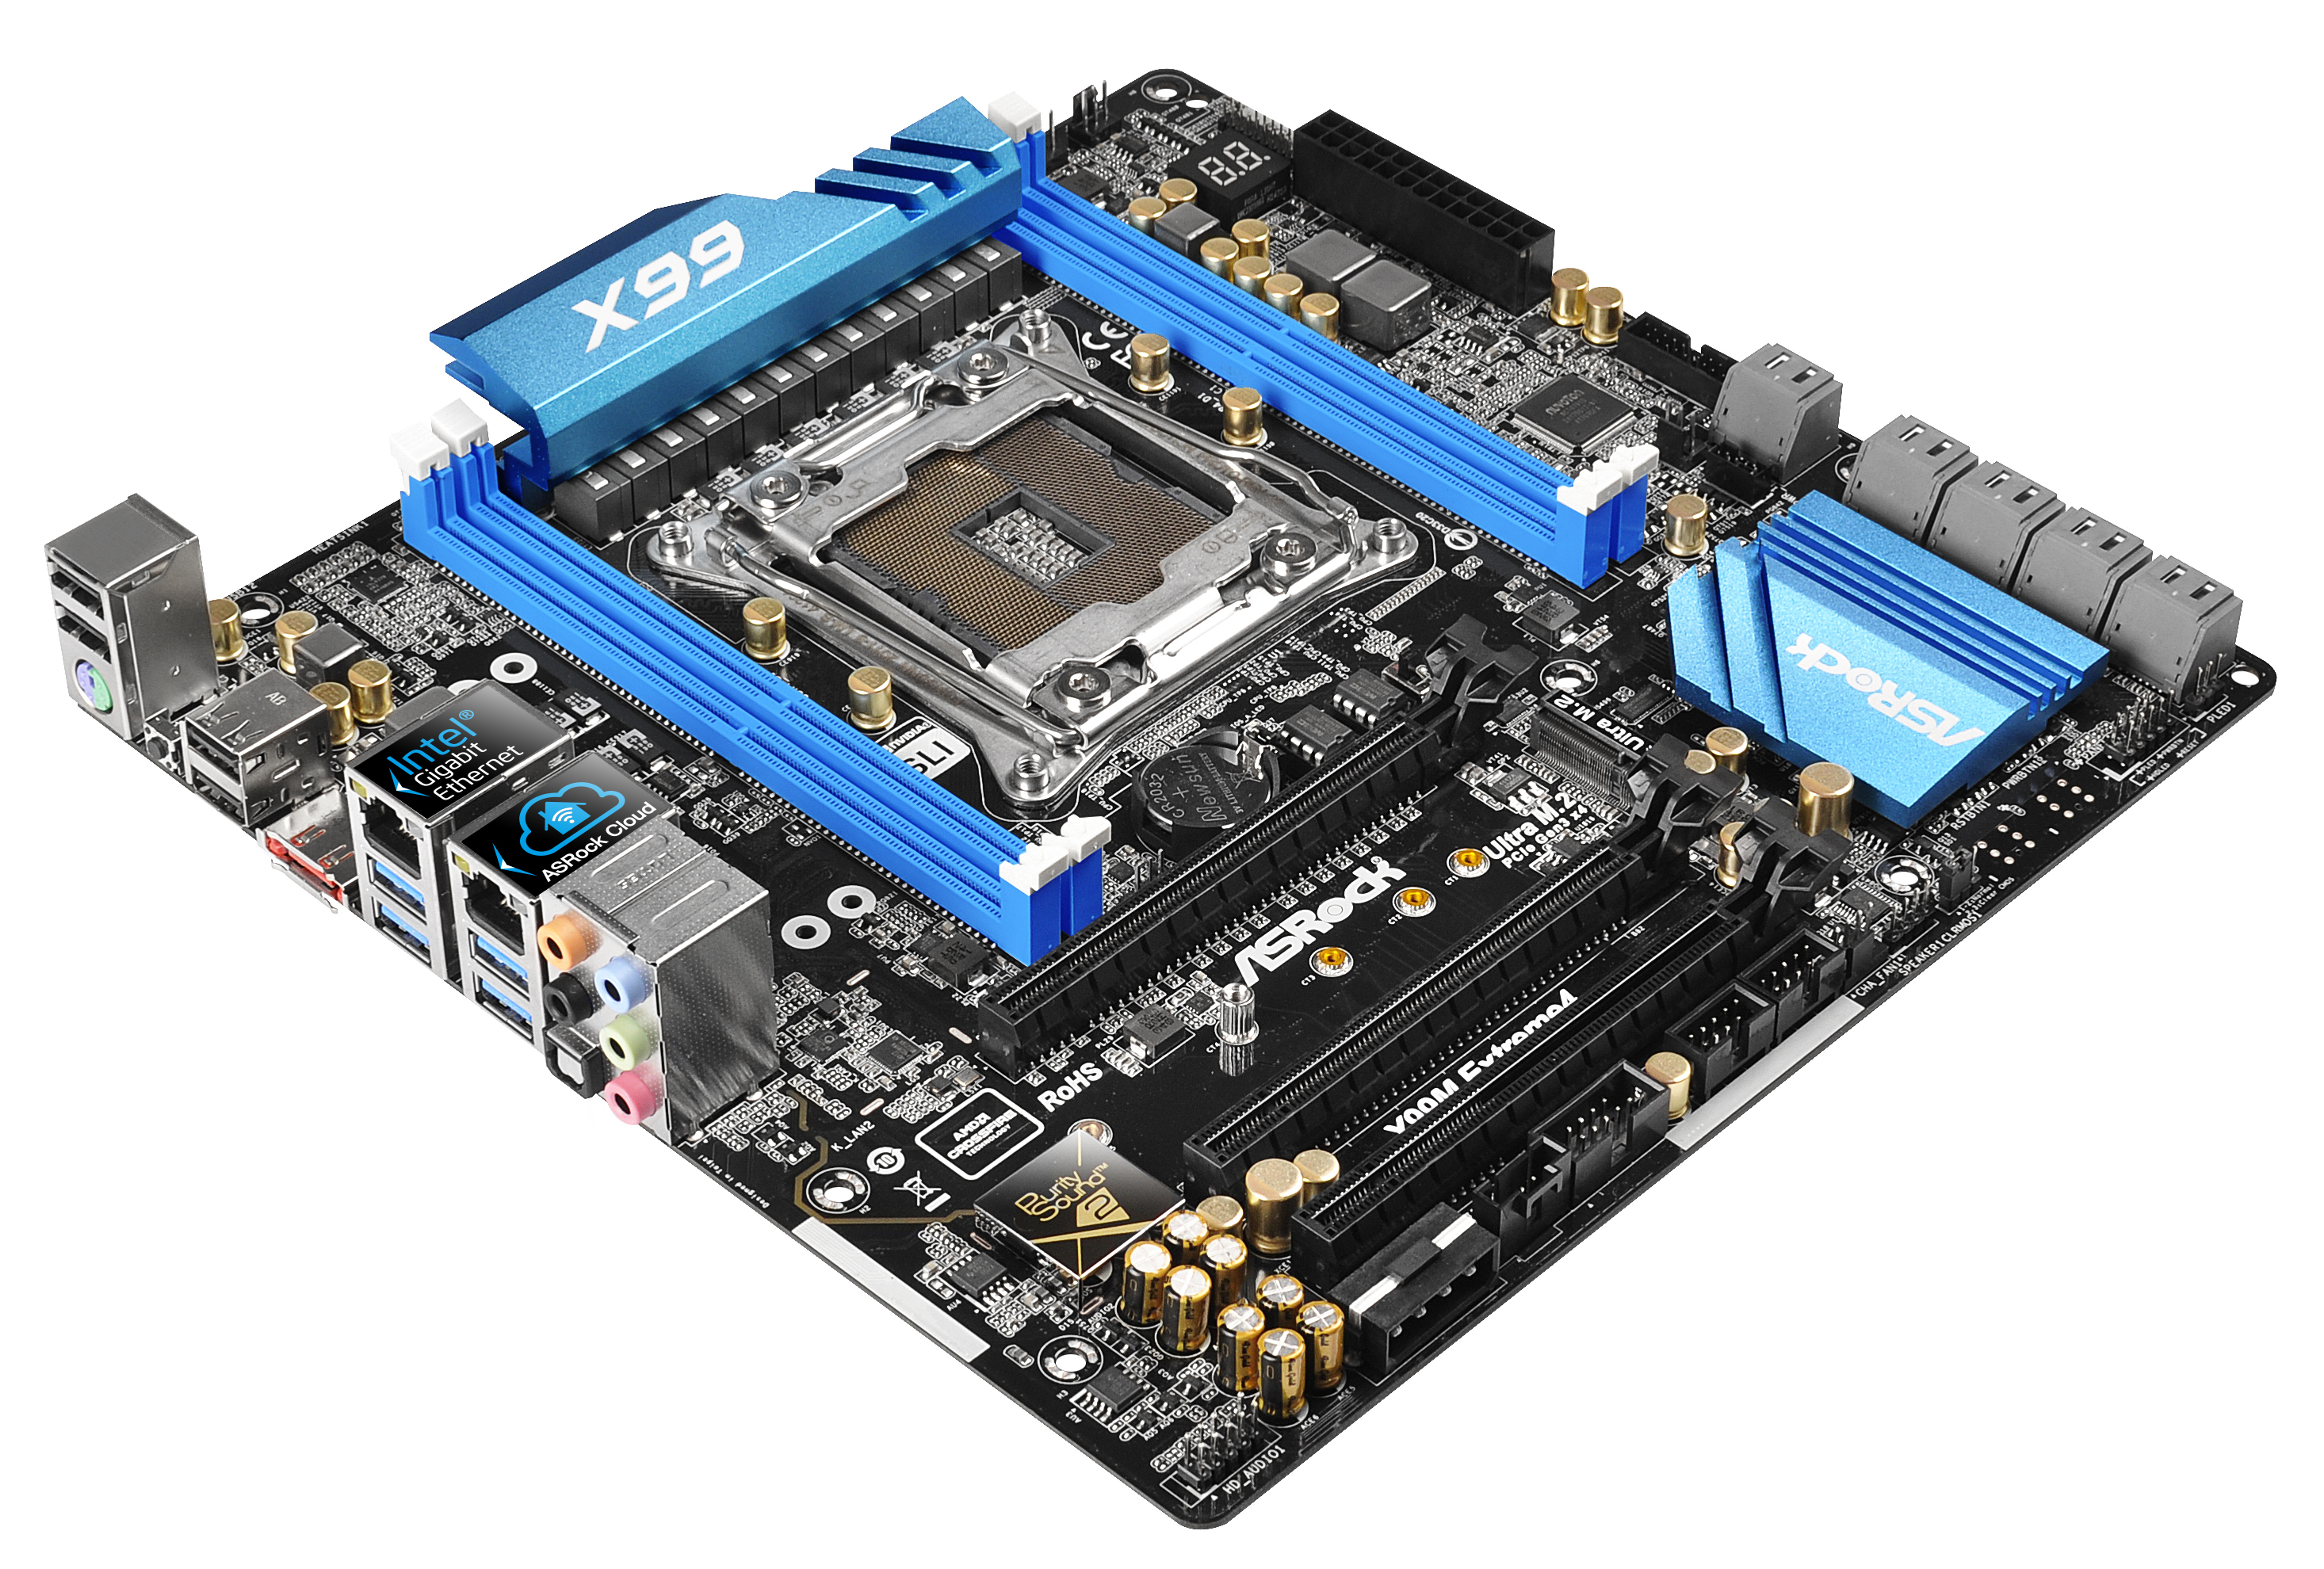 Configure PC w/ ASRock X99M Extreme4 Motherboard